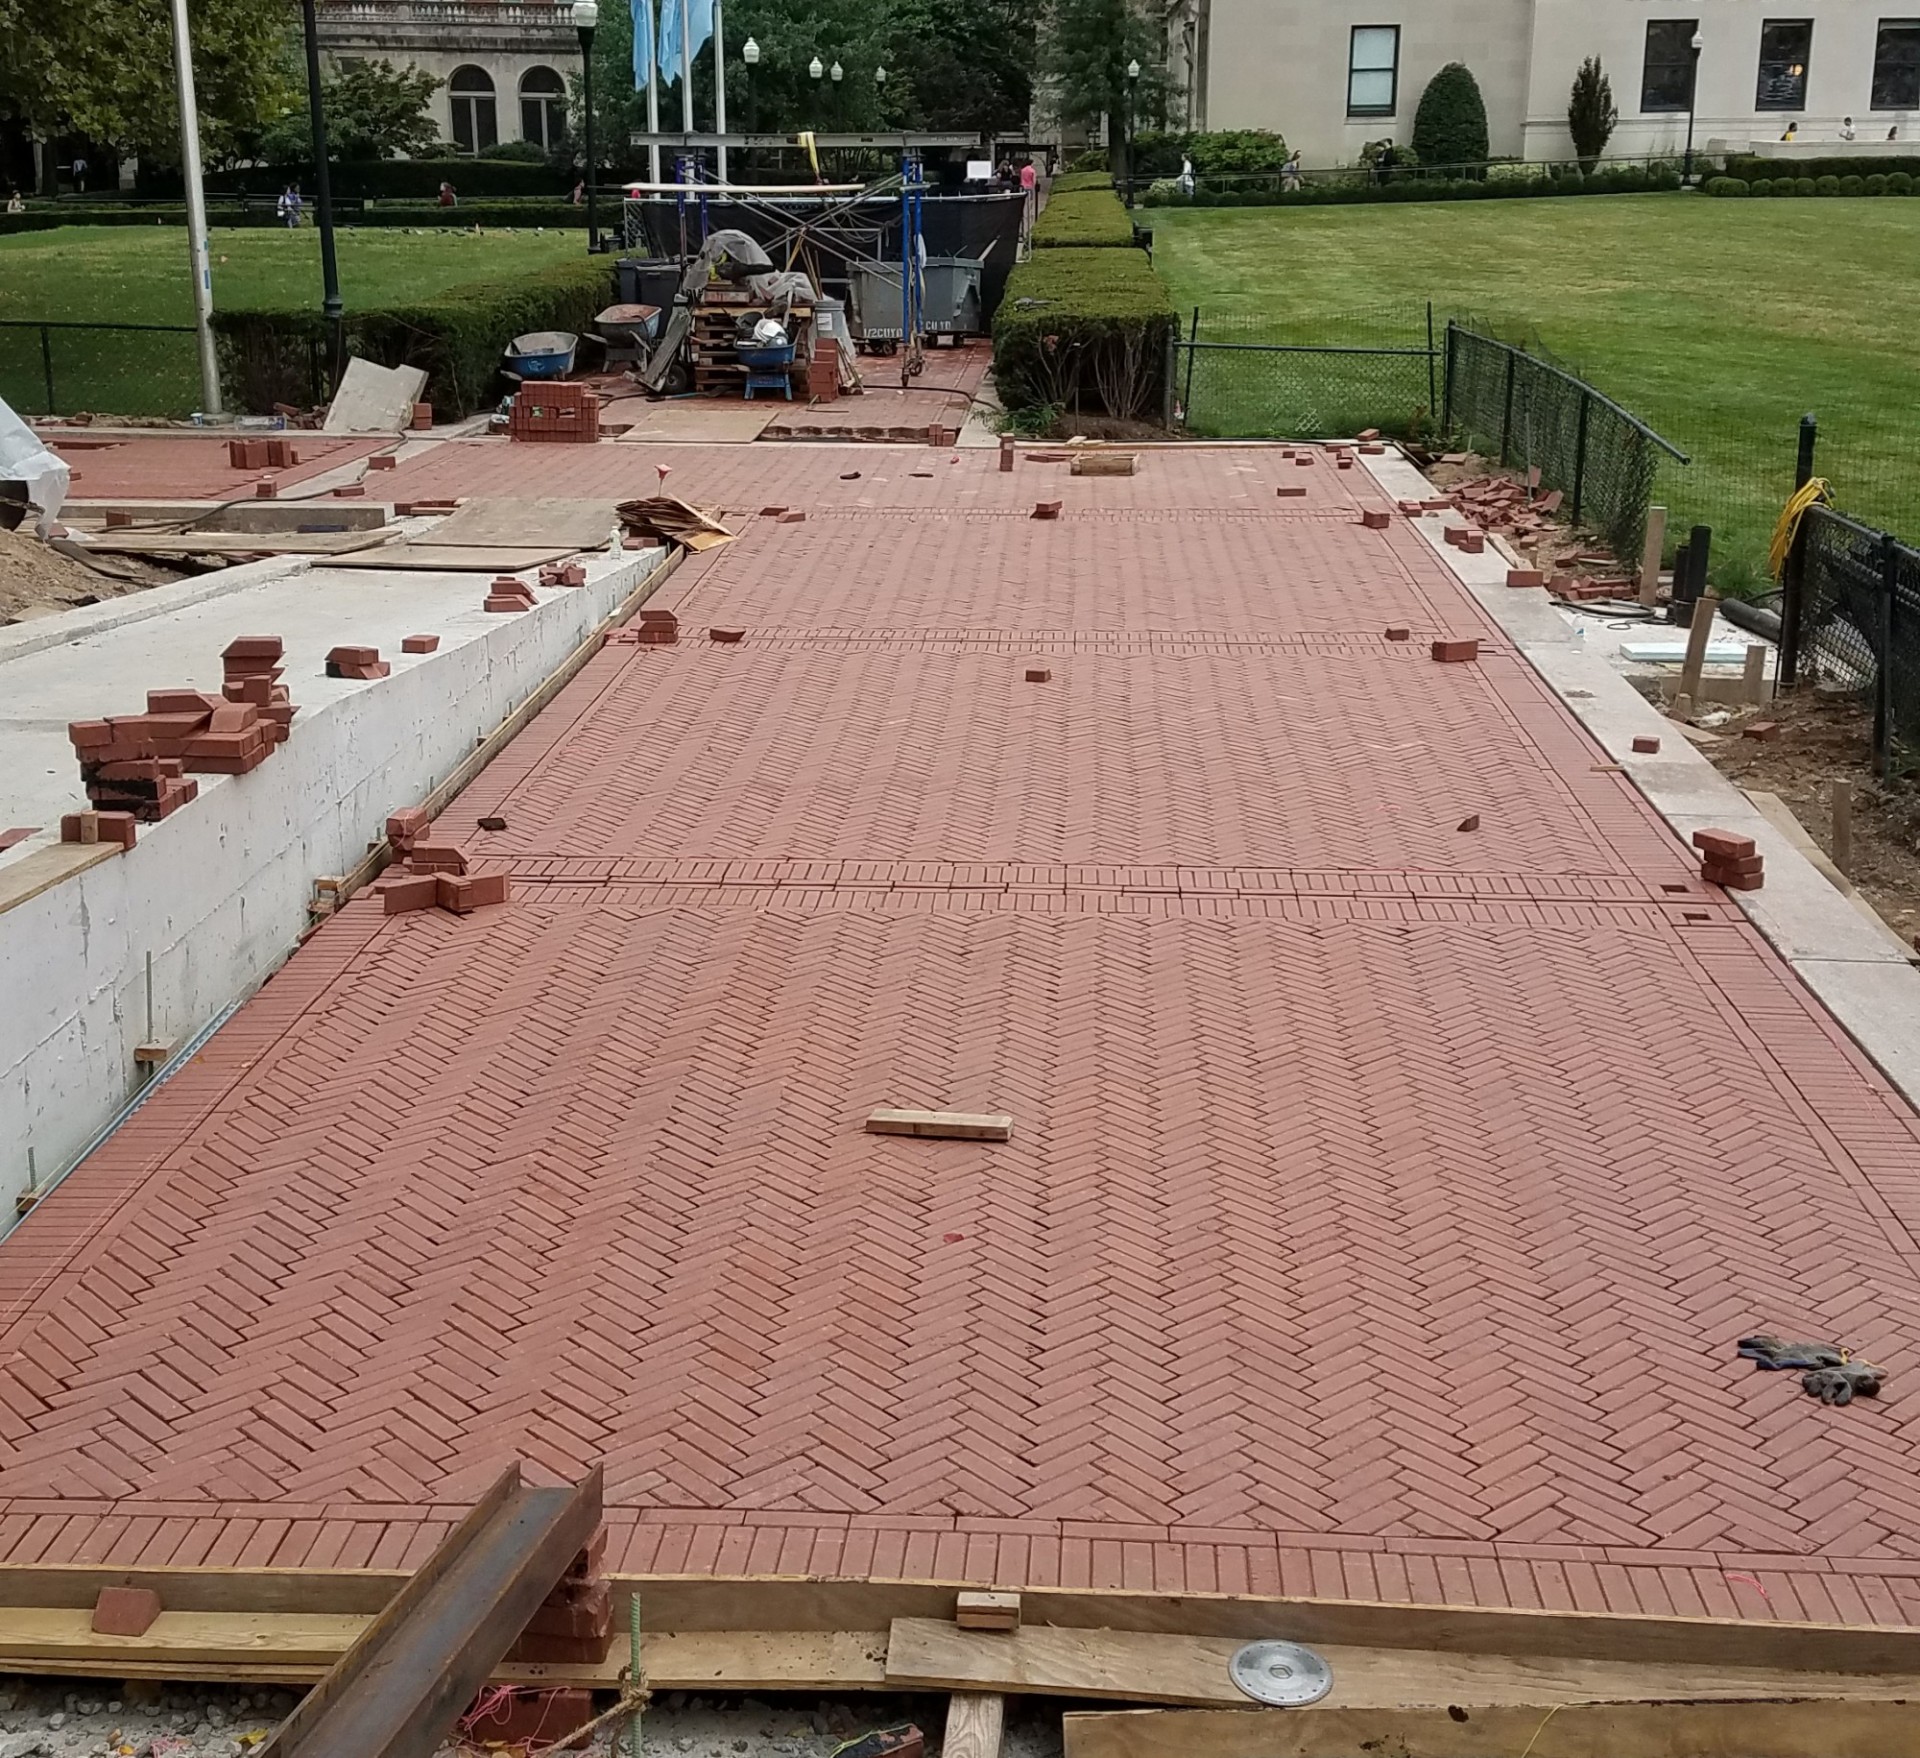 A portion of the pathway next to the construction of the new ramp will reopen on Wednesday, September 12 while construction of the ramp and steps is completed.